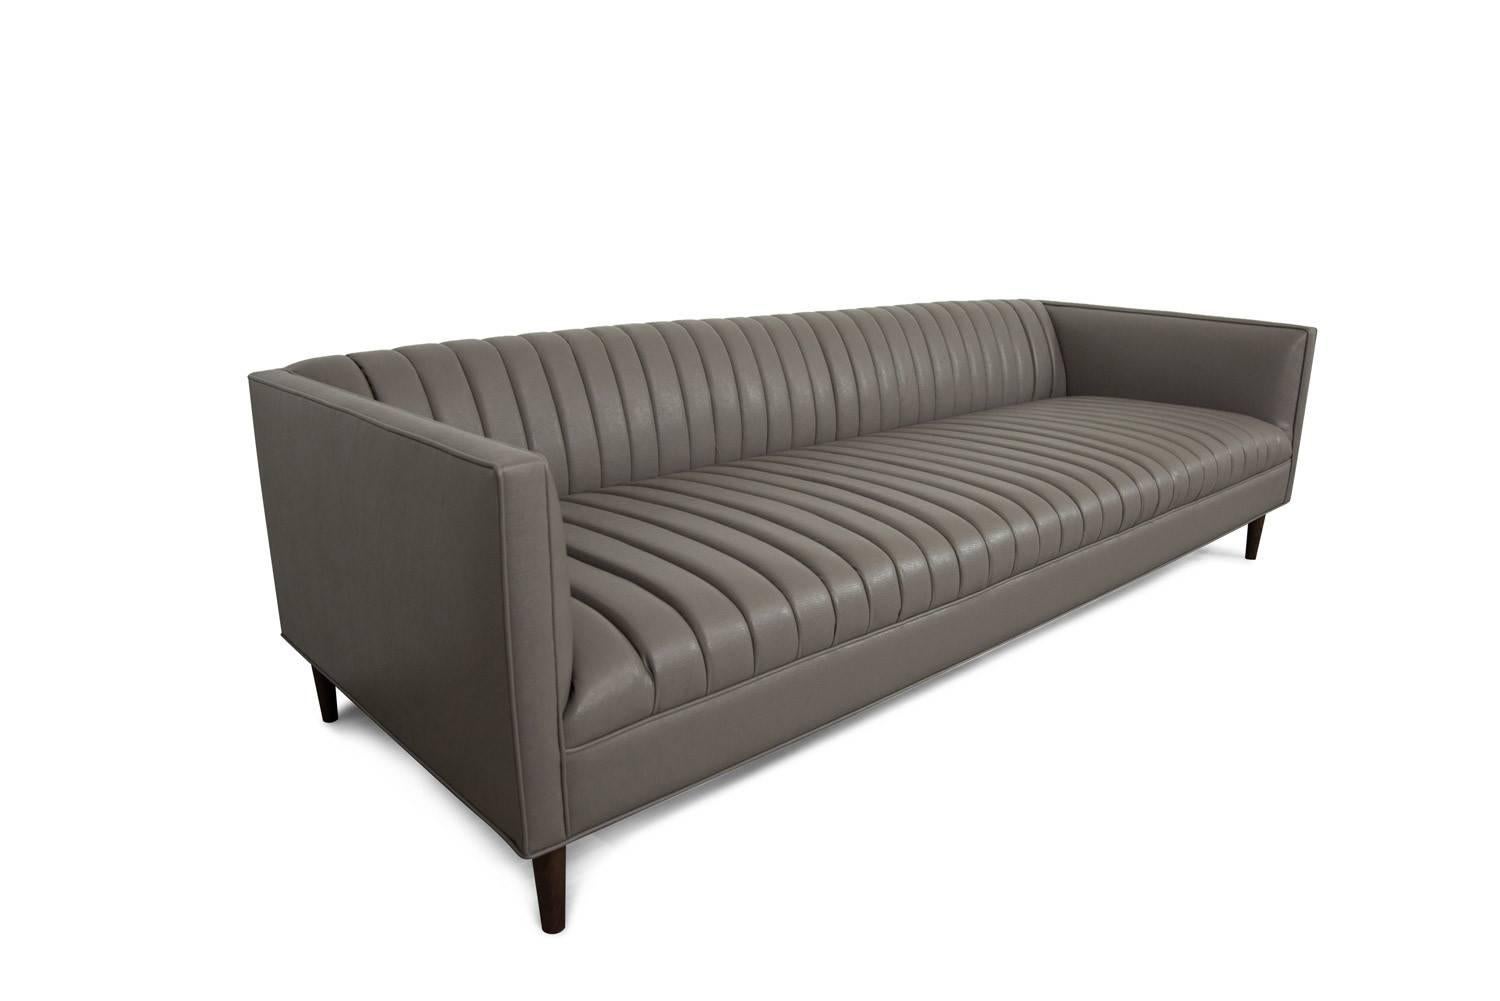 This sleek charcoal faux leather creates a contemporary long arm tufted sofa. Featuring Klein midnight faux leather and 7